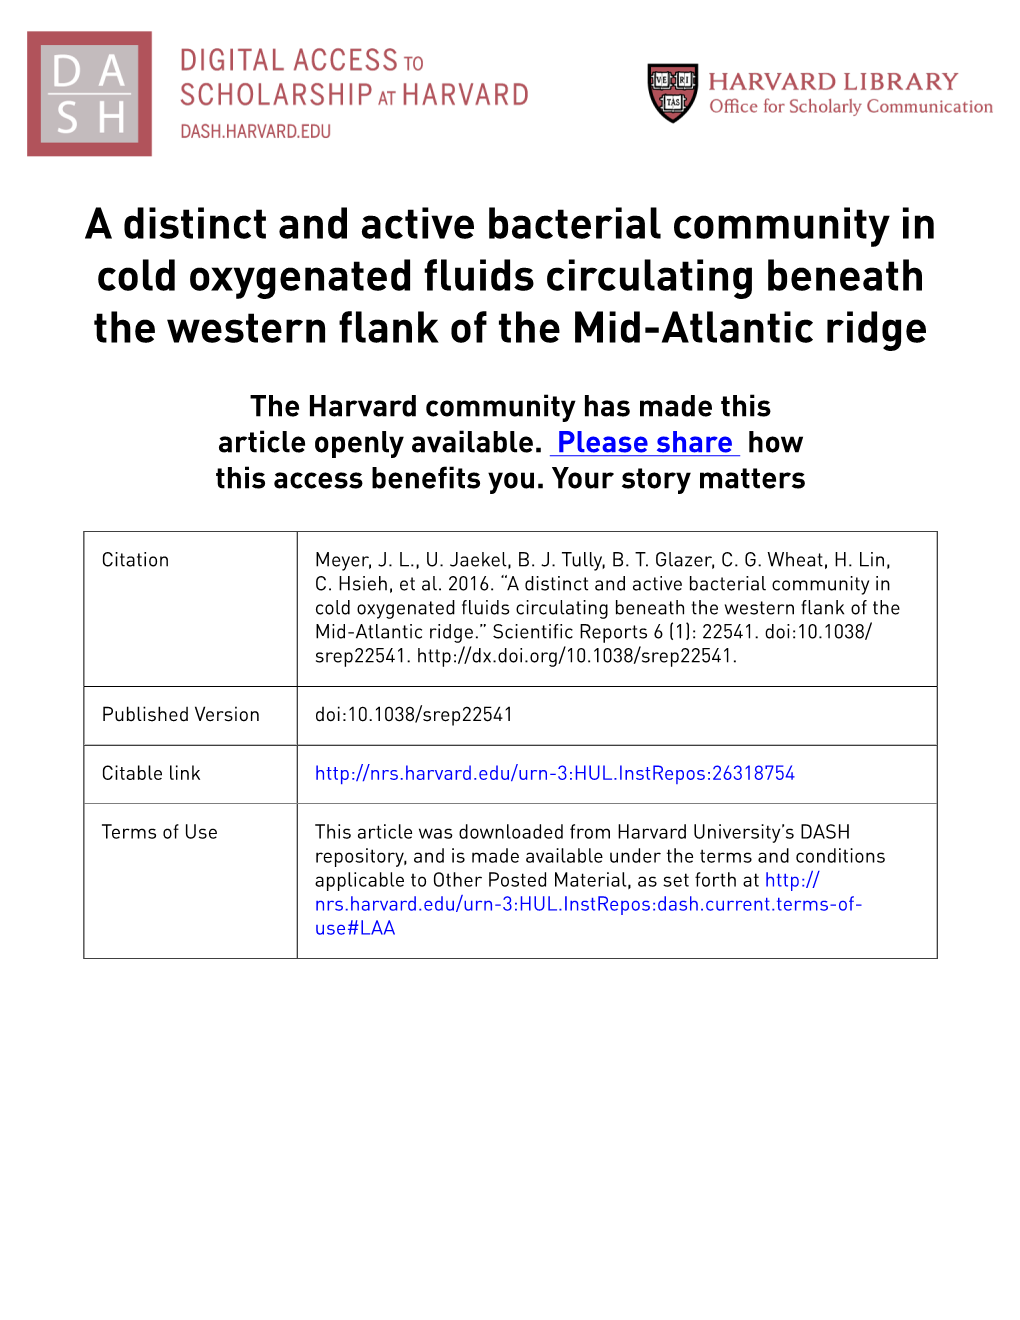 A Distinct and Active Bacterial Community in Cold Oxygenated Fluids Circulating Beneath the Western Flank of the Mid-Atlantic Ridge